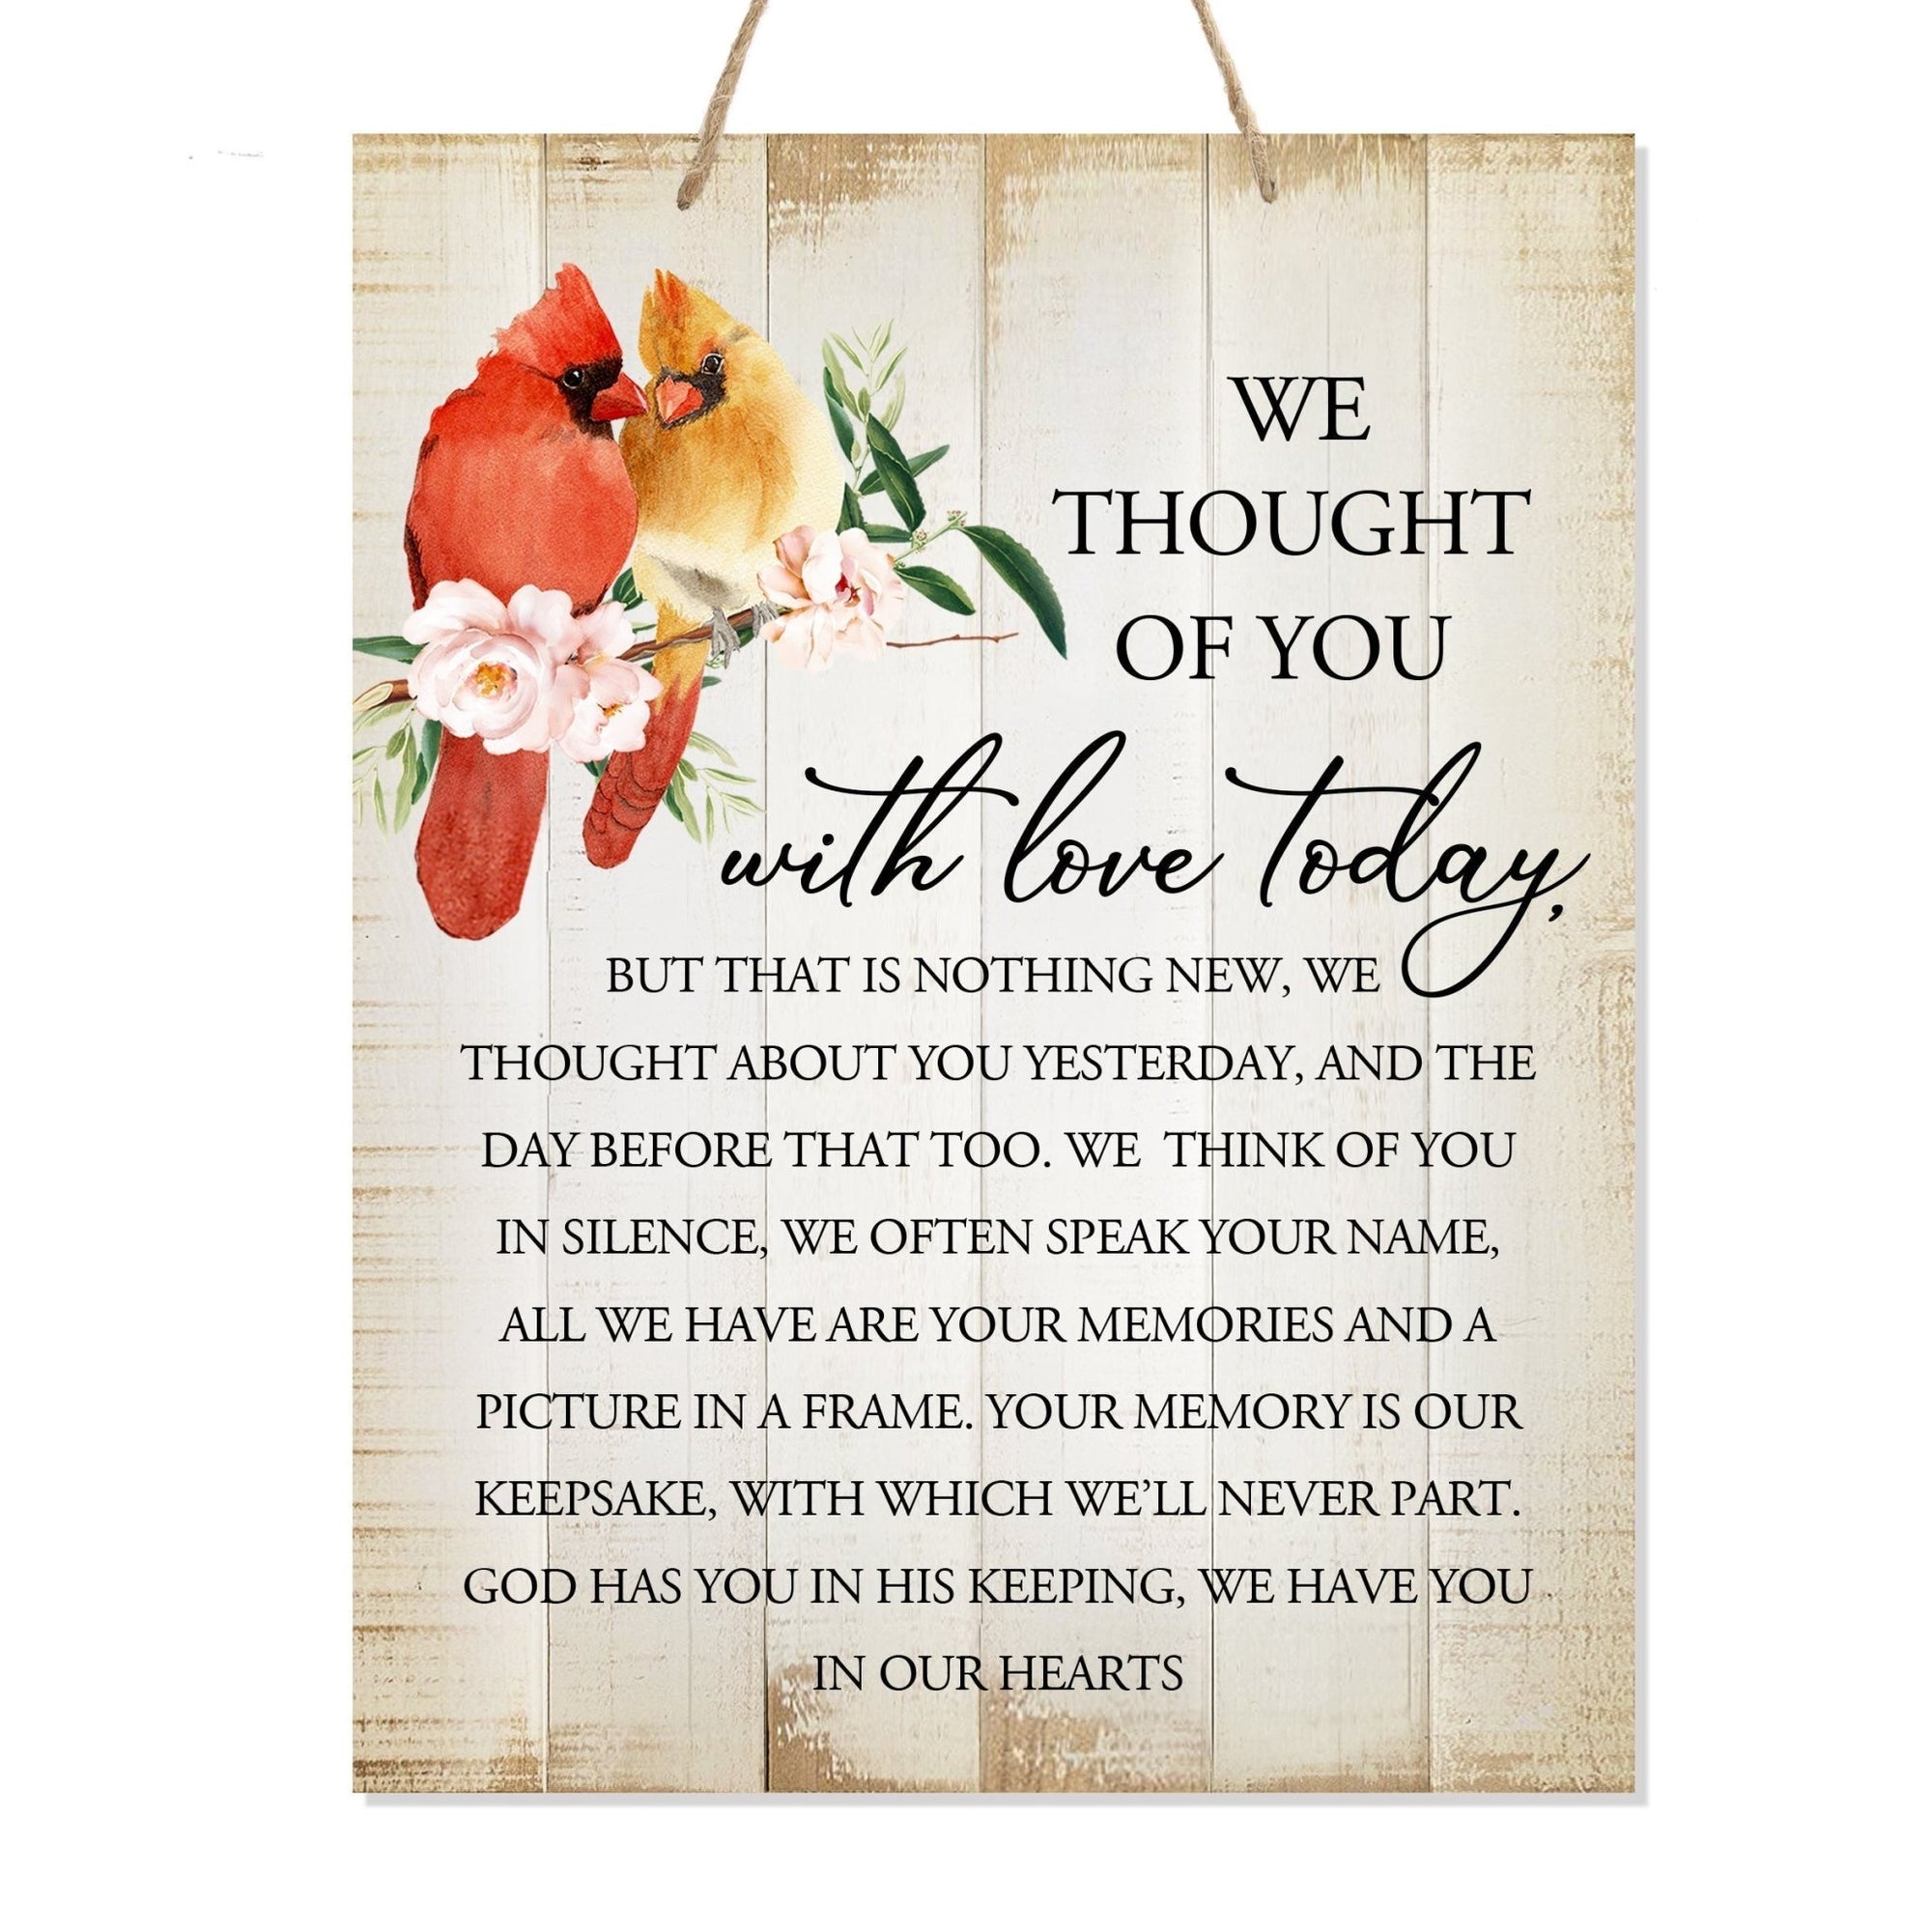 Wooden hanging memorial wall sign, a comforting reminder of the past, and a symbol of eternal love and remembrance.